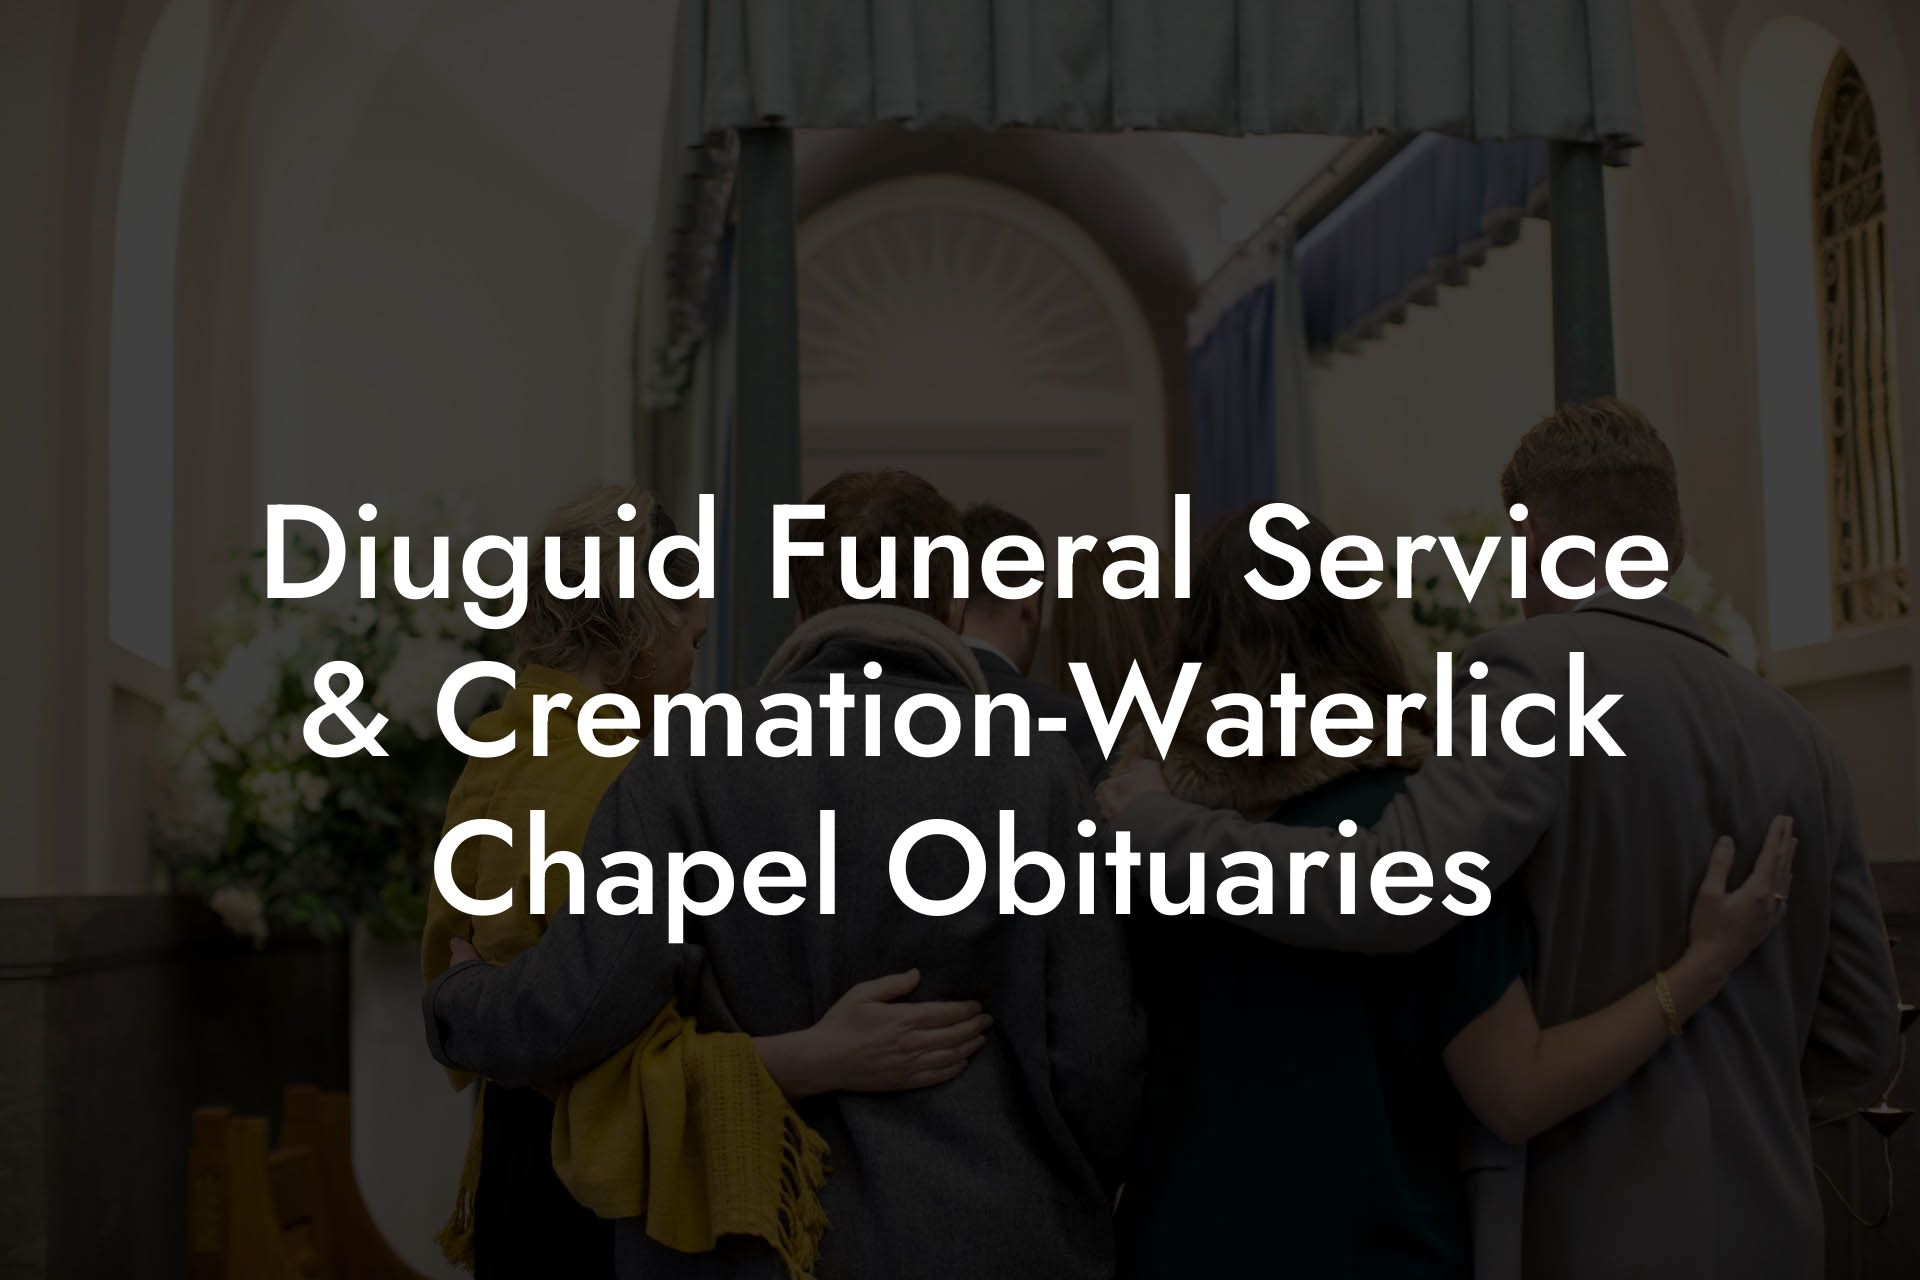 Diuguid Funeral Service & Cremation-Waterlick Chapel Obituaries